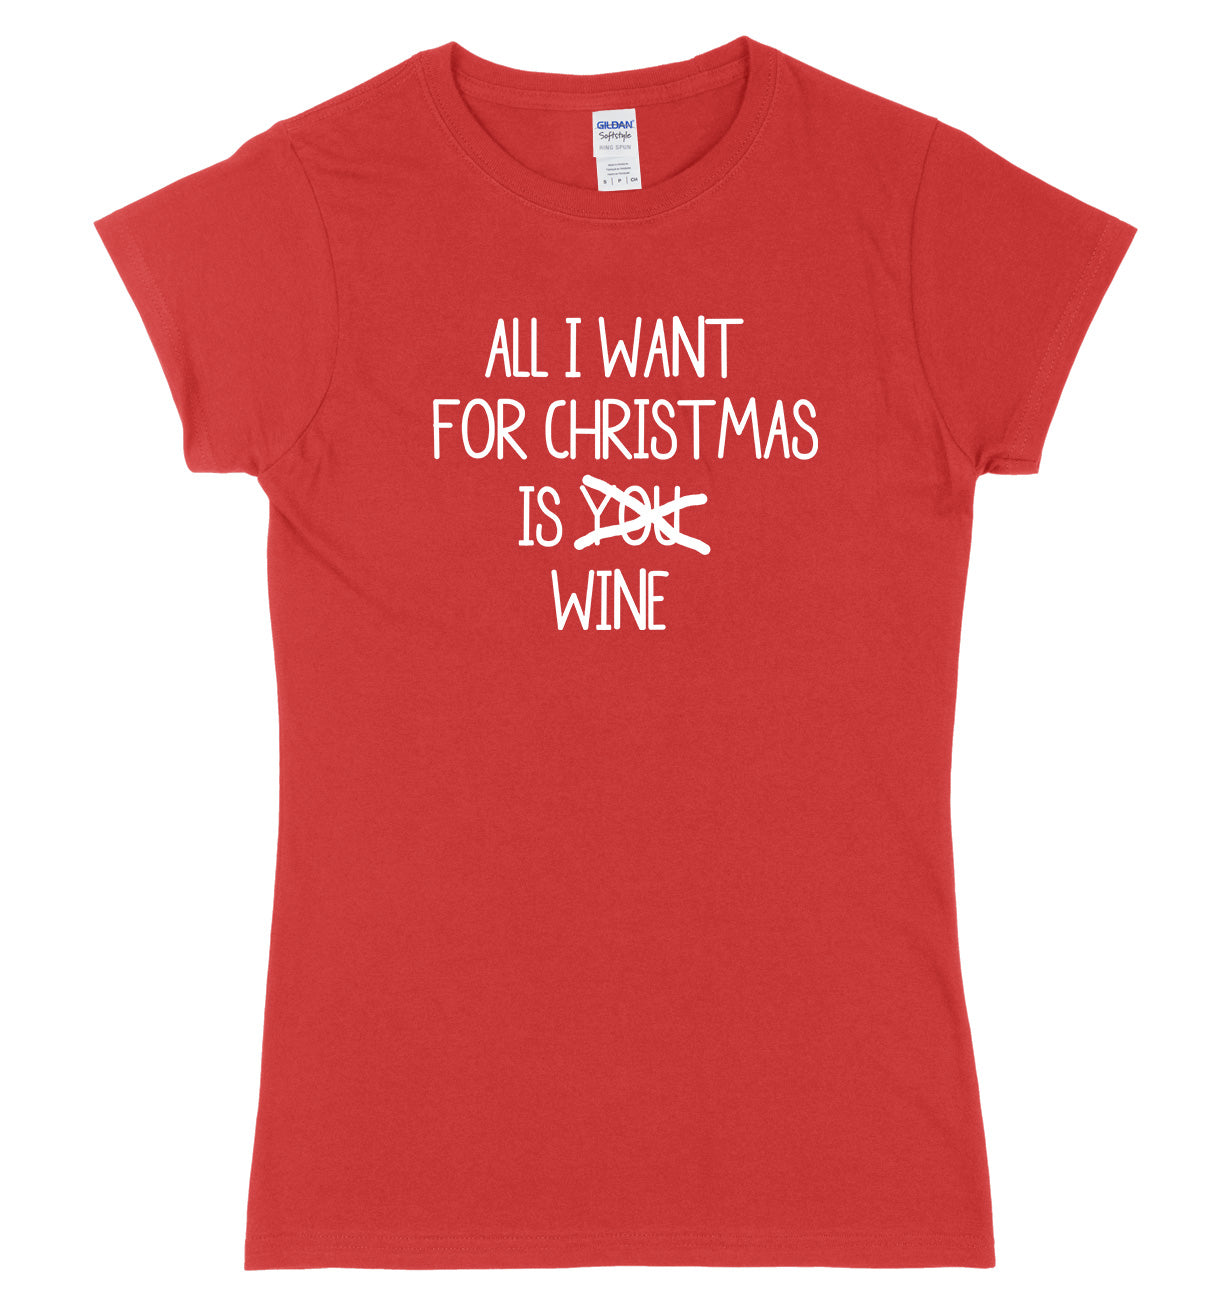 All I Want For Christmas Is Wine Womens Ladies Slim Fit Funny Christmas T-Shirt